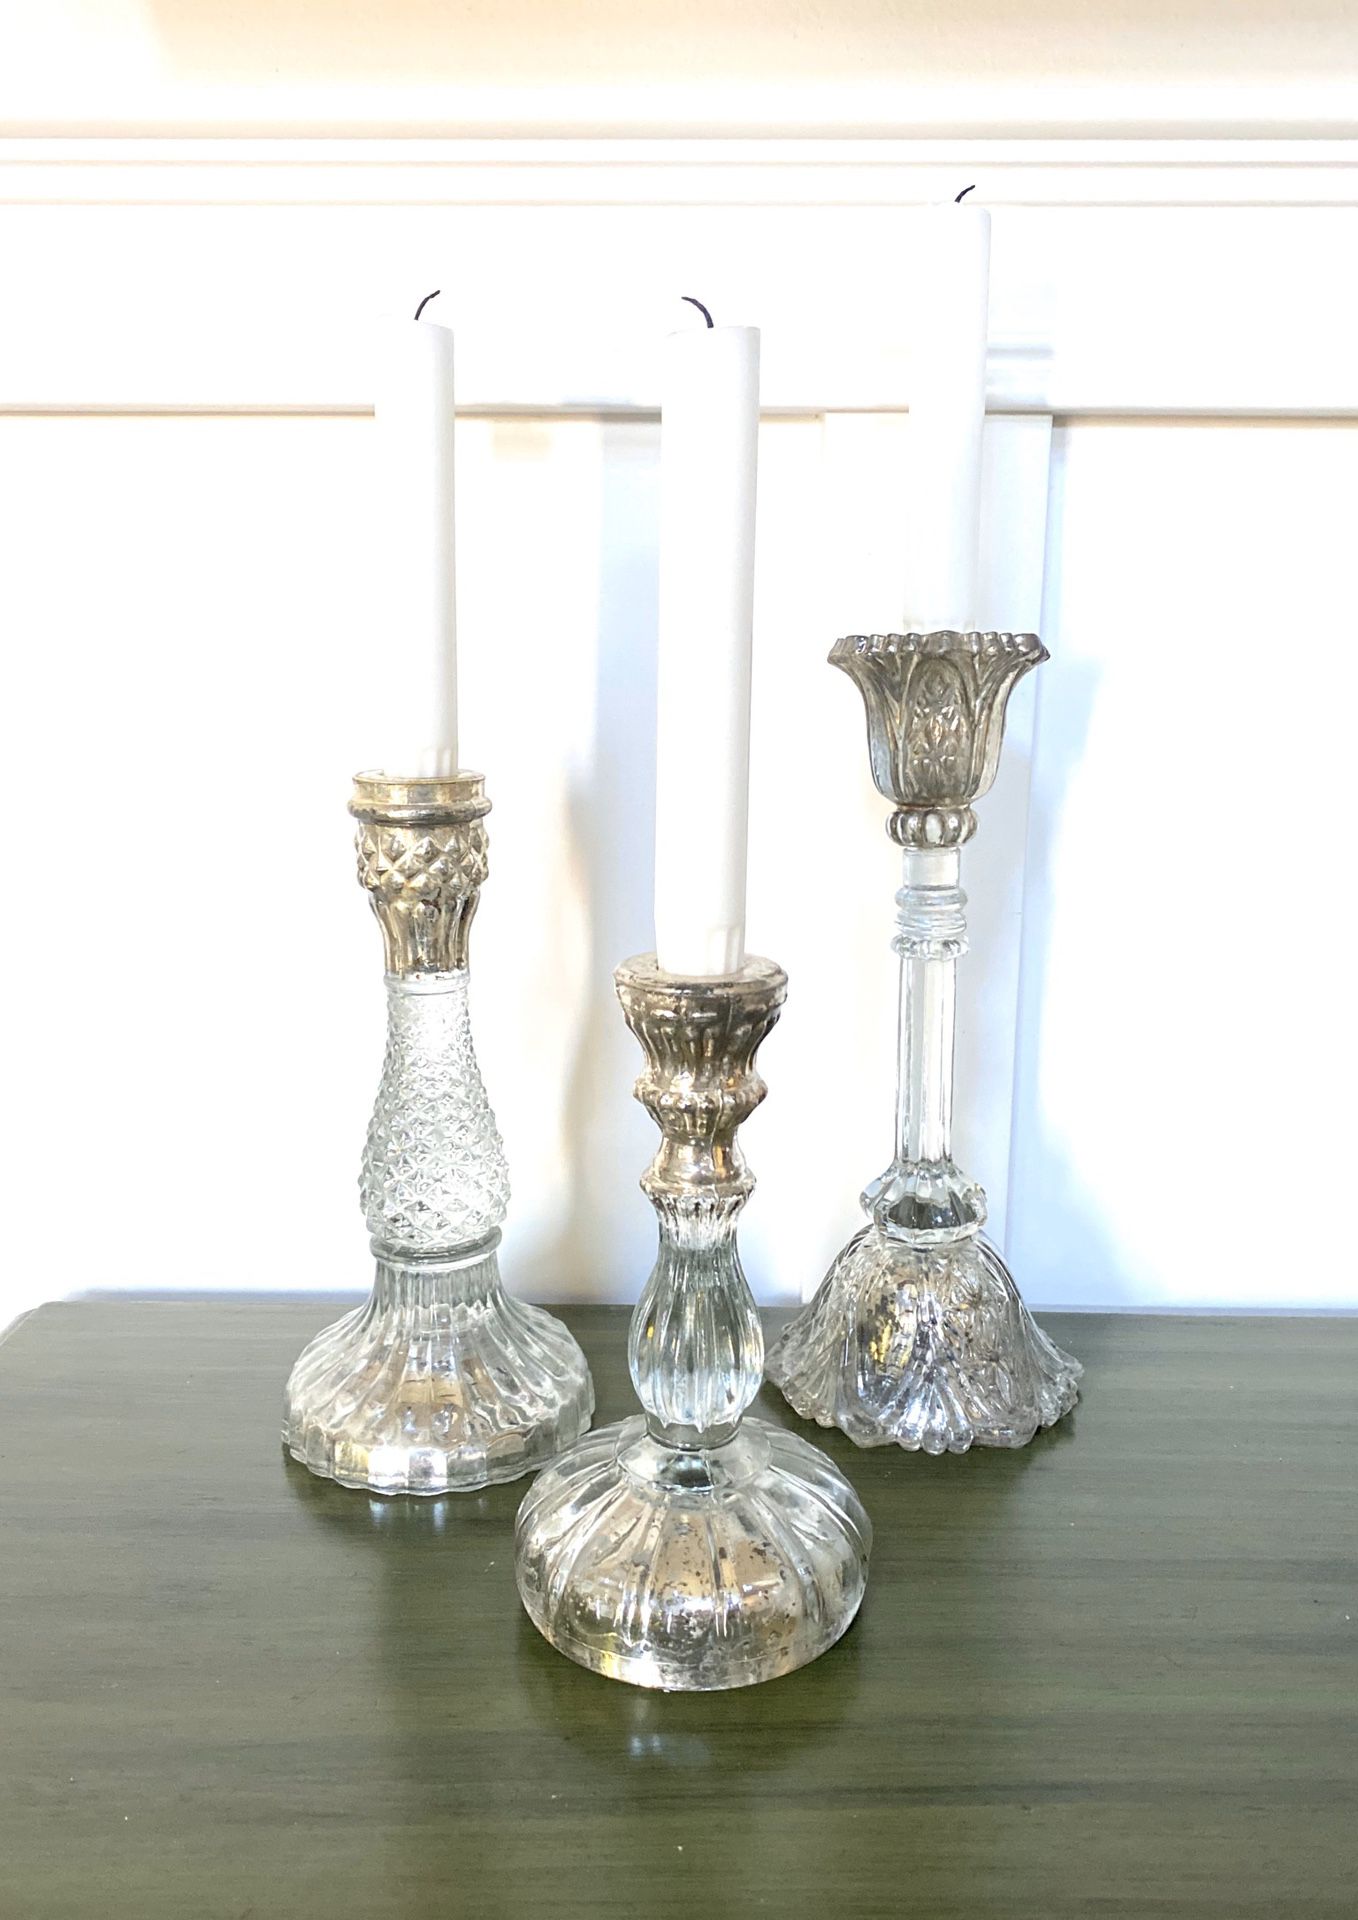 3 Pottery barn clear and mercury glass candle holders.